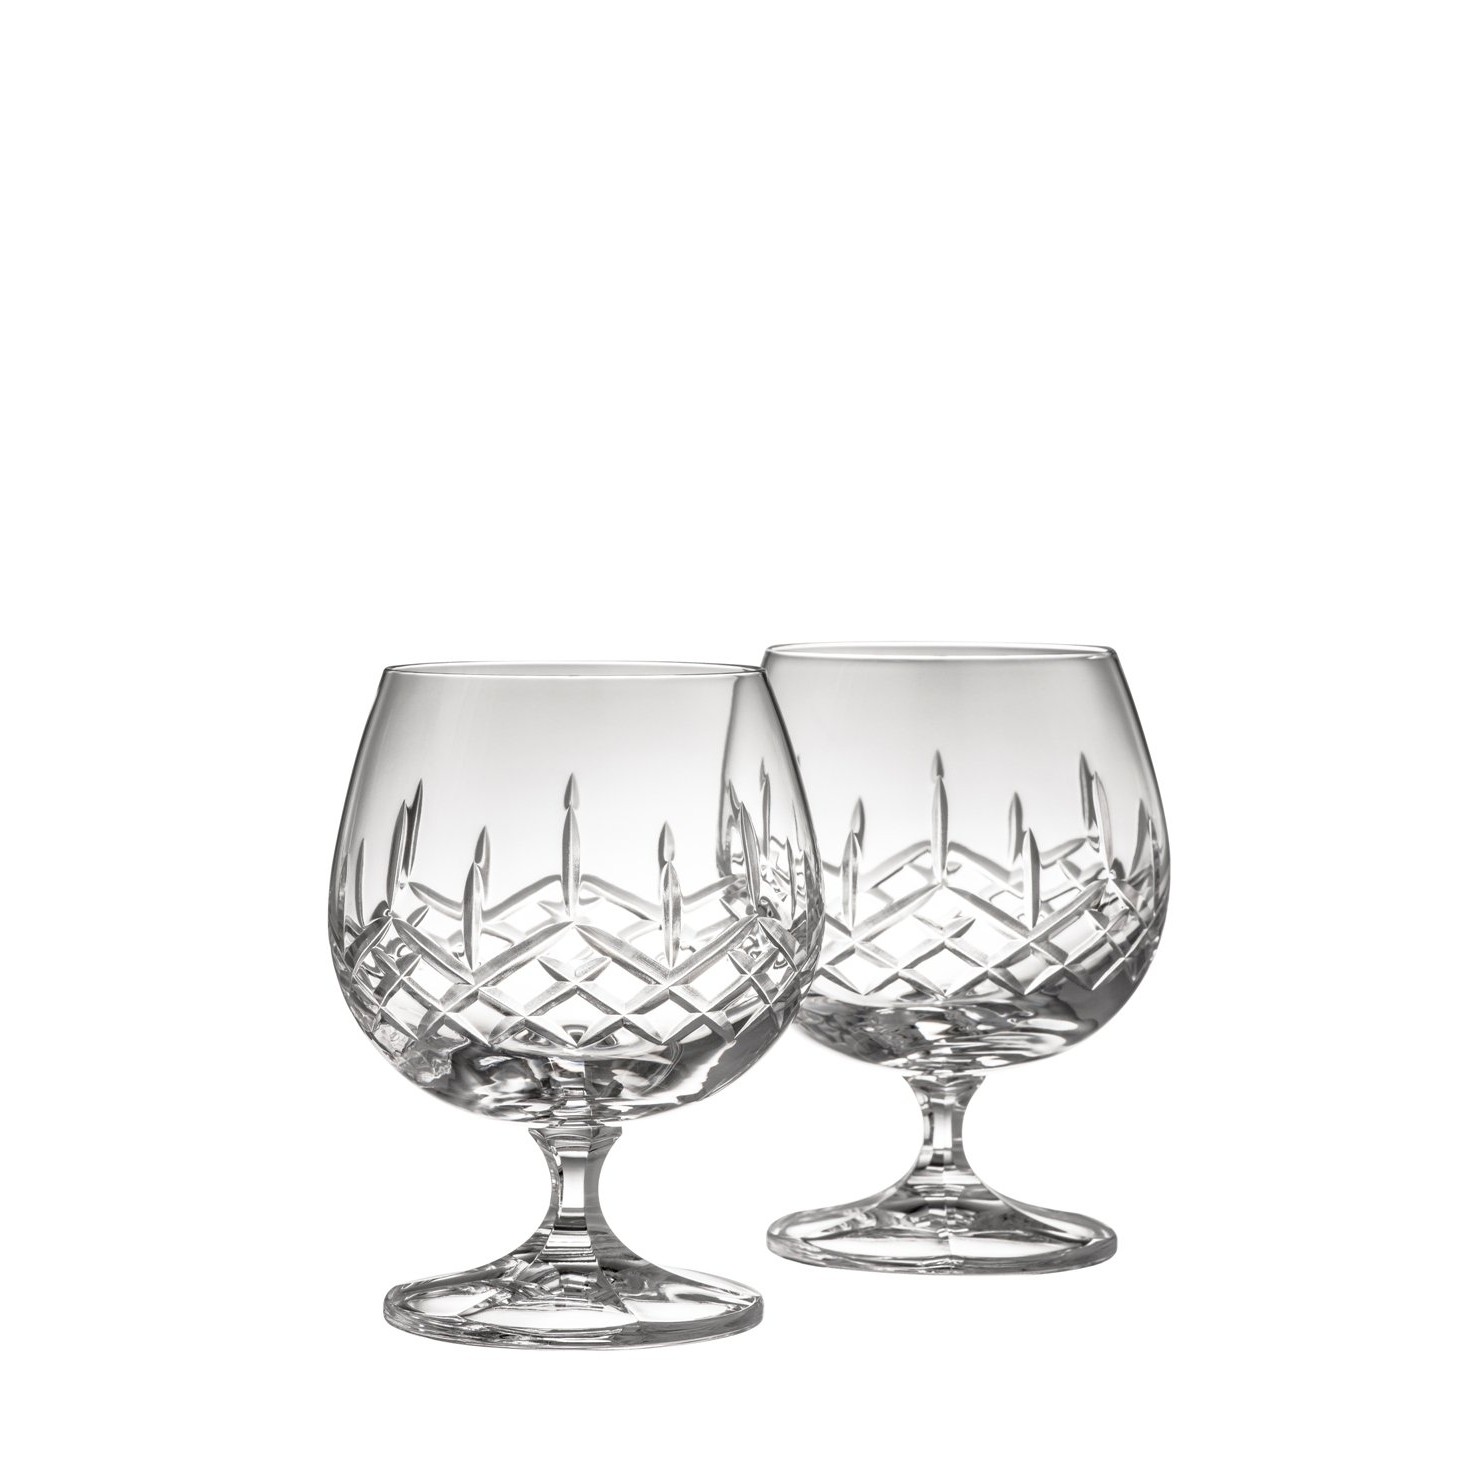 Galway Crystal Brandy Crystal Glasses Gifts For Home Tableware at